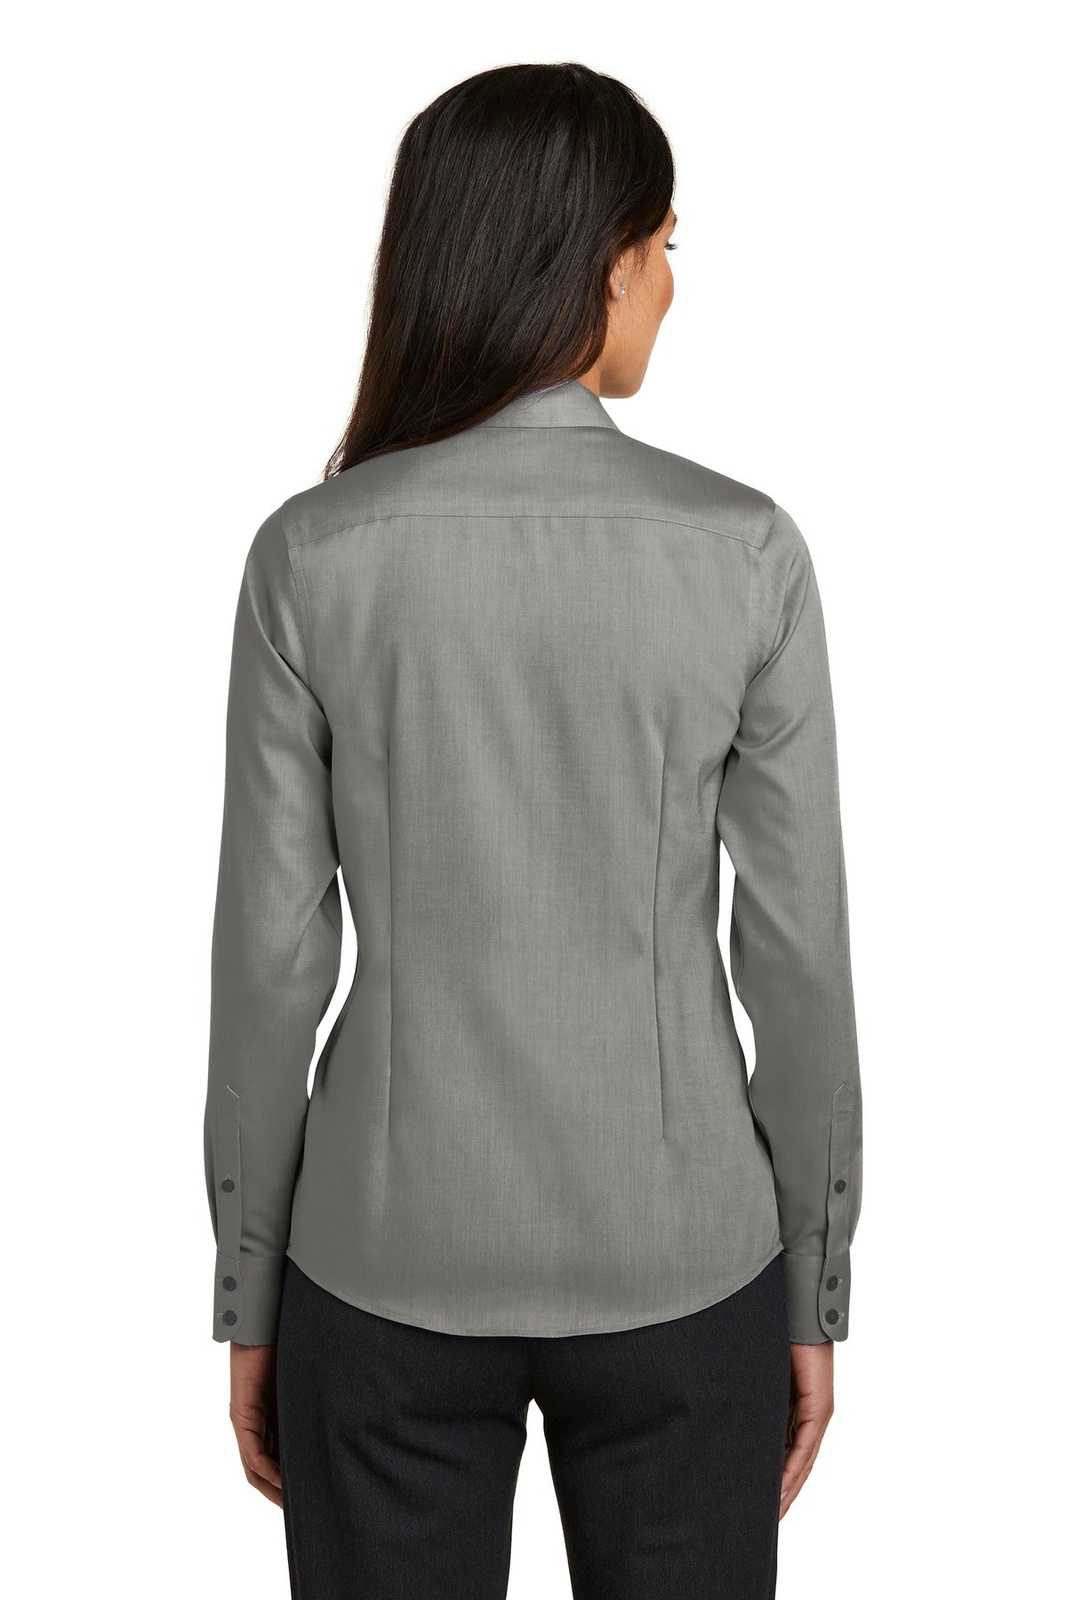 Red House RH250 Ladies Pinpoint Oxford Non-Iron Shirt - Charcoal - HIT a Double - 2